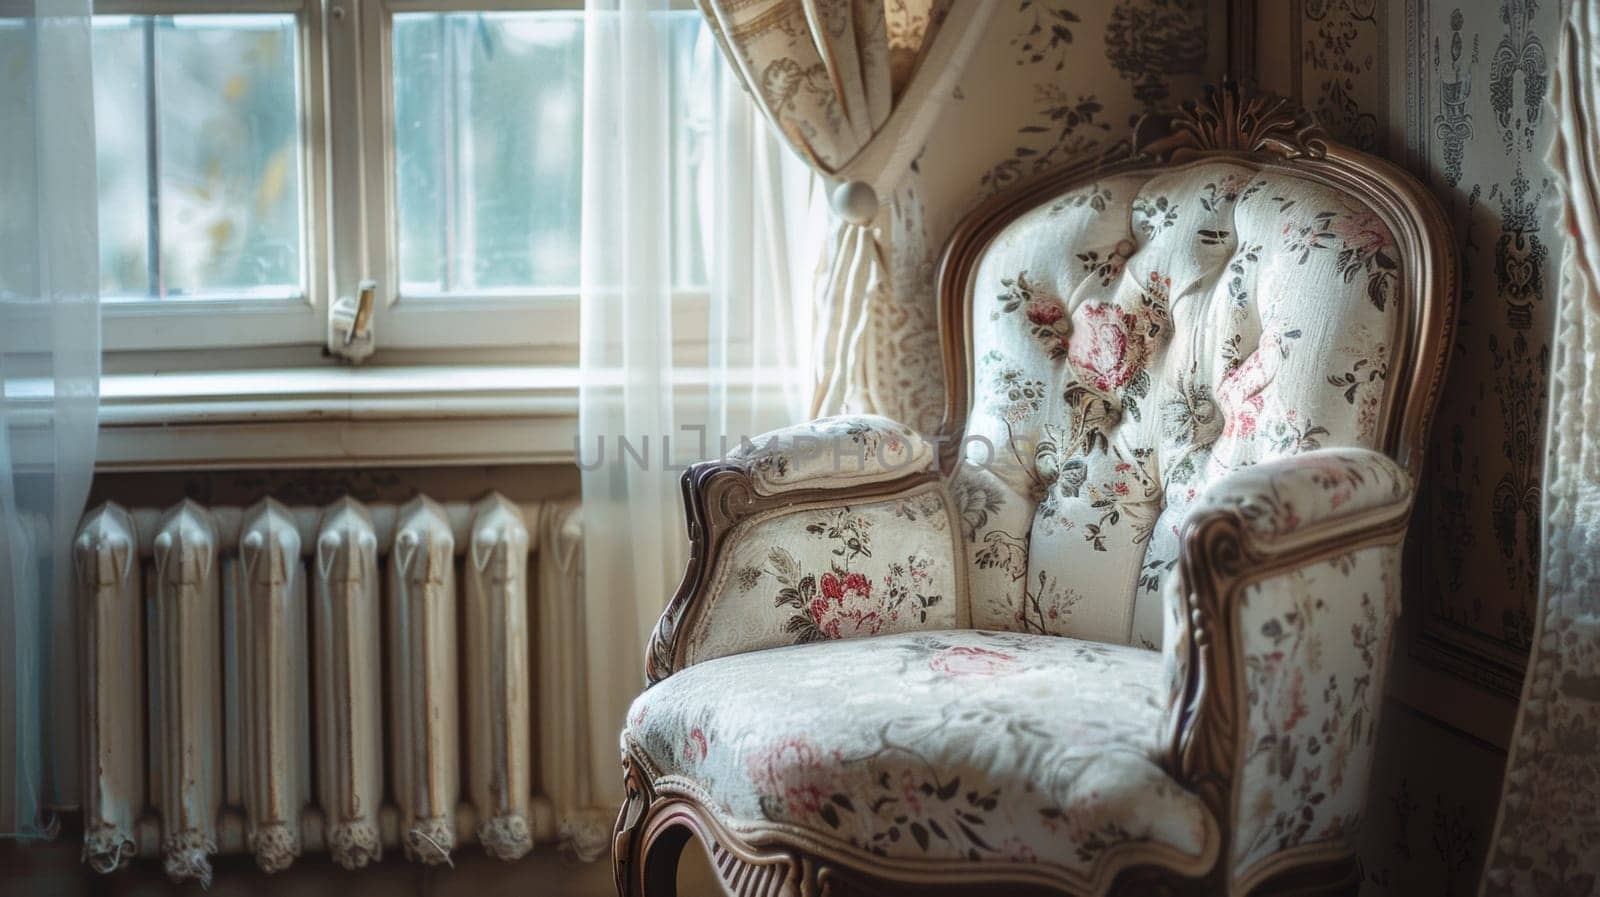 A chair in front of a window with floral patterned fabric